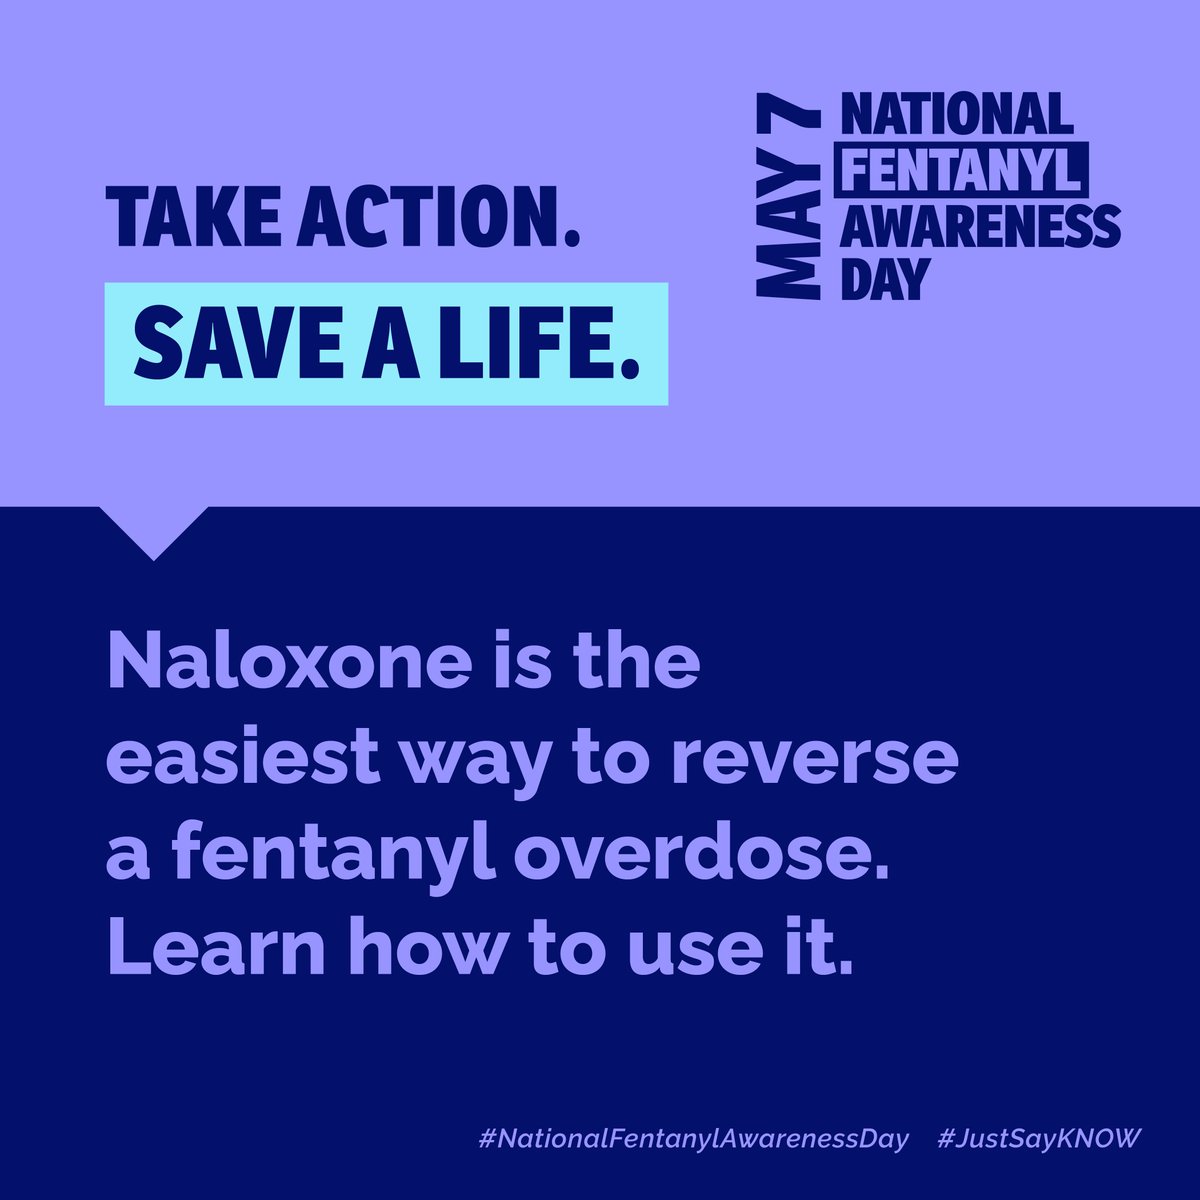 Highly addictive synthetic opioids like #fentanyl are a major contributor to U.S. drug overdose deaths. Help fight the opioid epidemic by learning to recognize and respond to an overdose, including how to use naloxone: ow.ly/ssps50Rp2c5 #NationalFentanylAwarenessDay